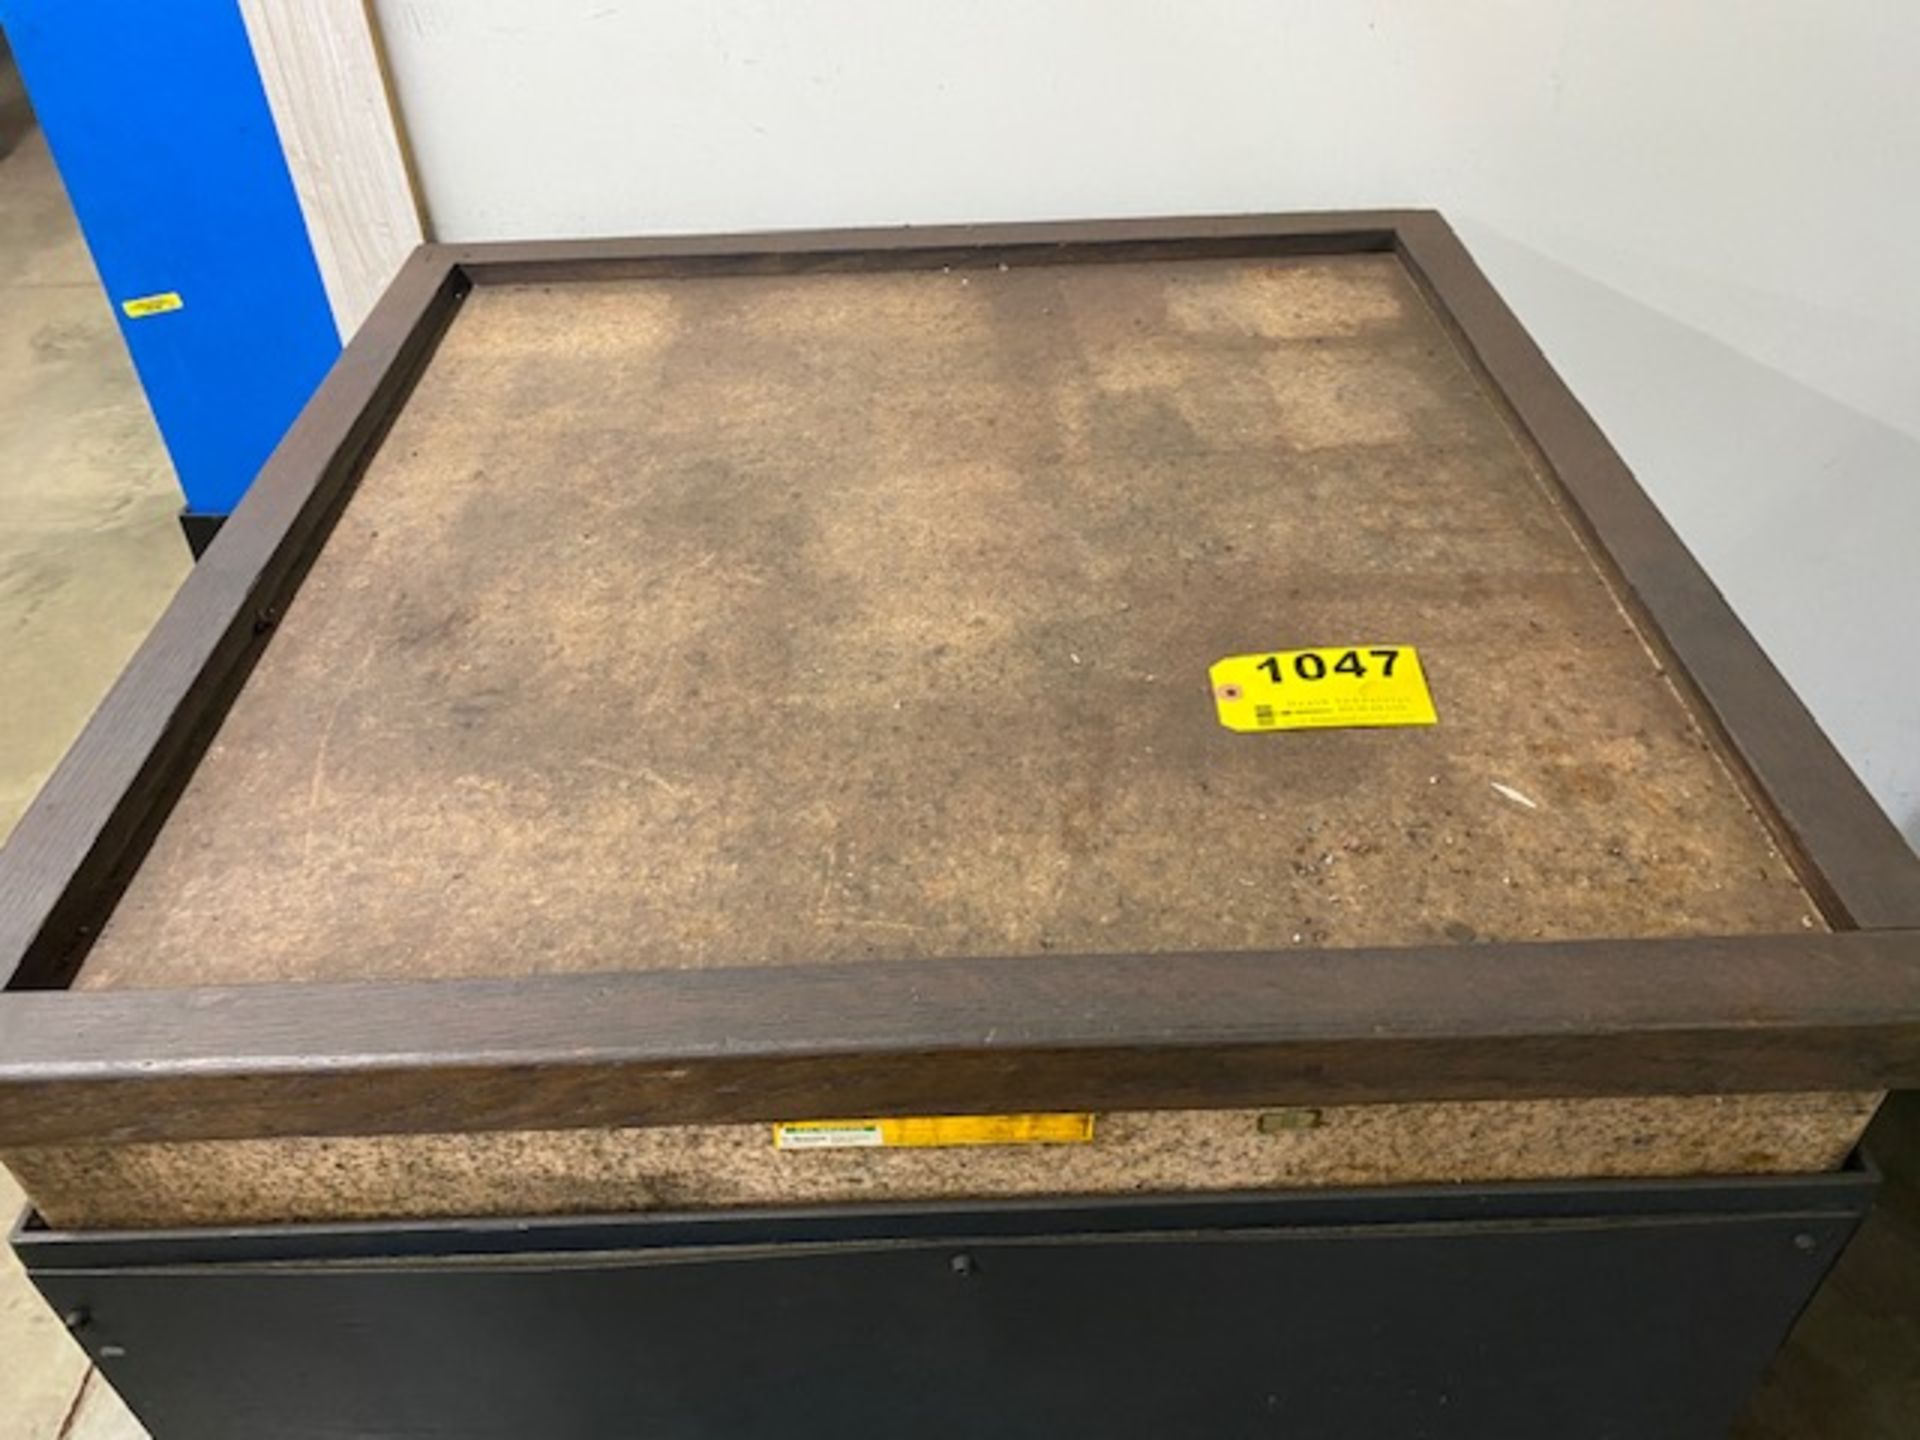 36" X 36" GRANITE SURFACE PLATE WITH STEEL STAND AND COVER - Image 2 of 3